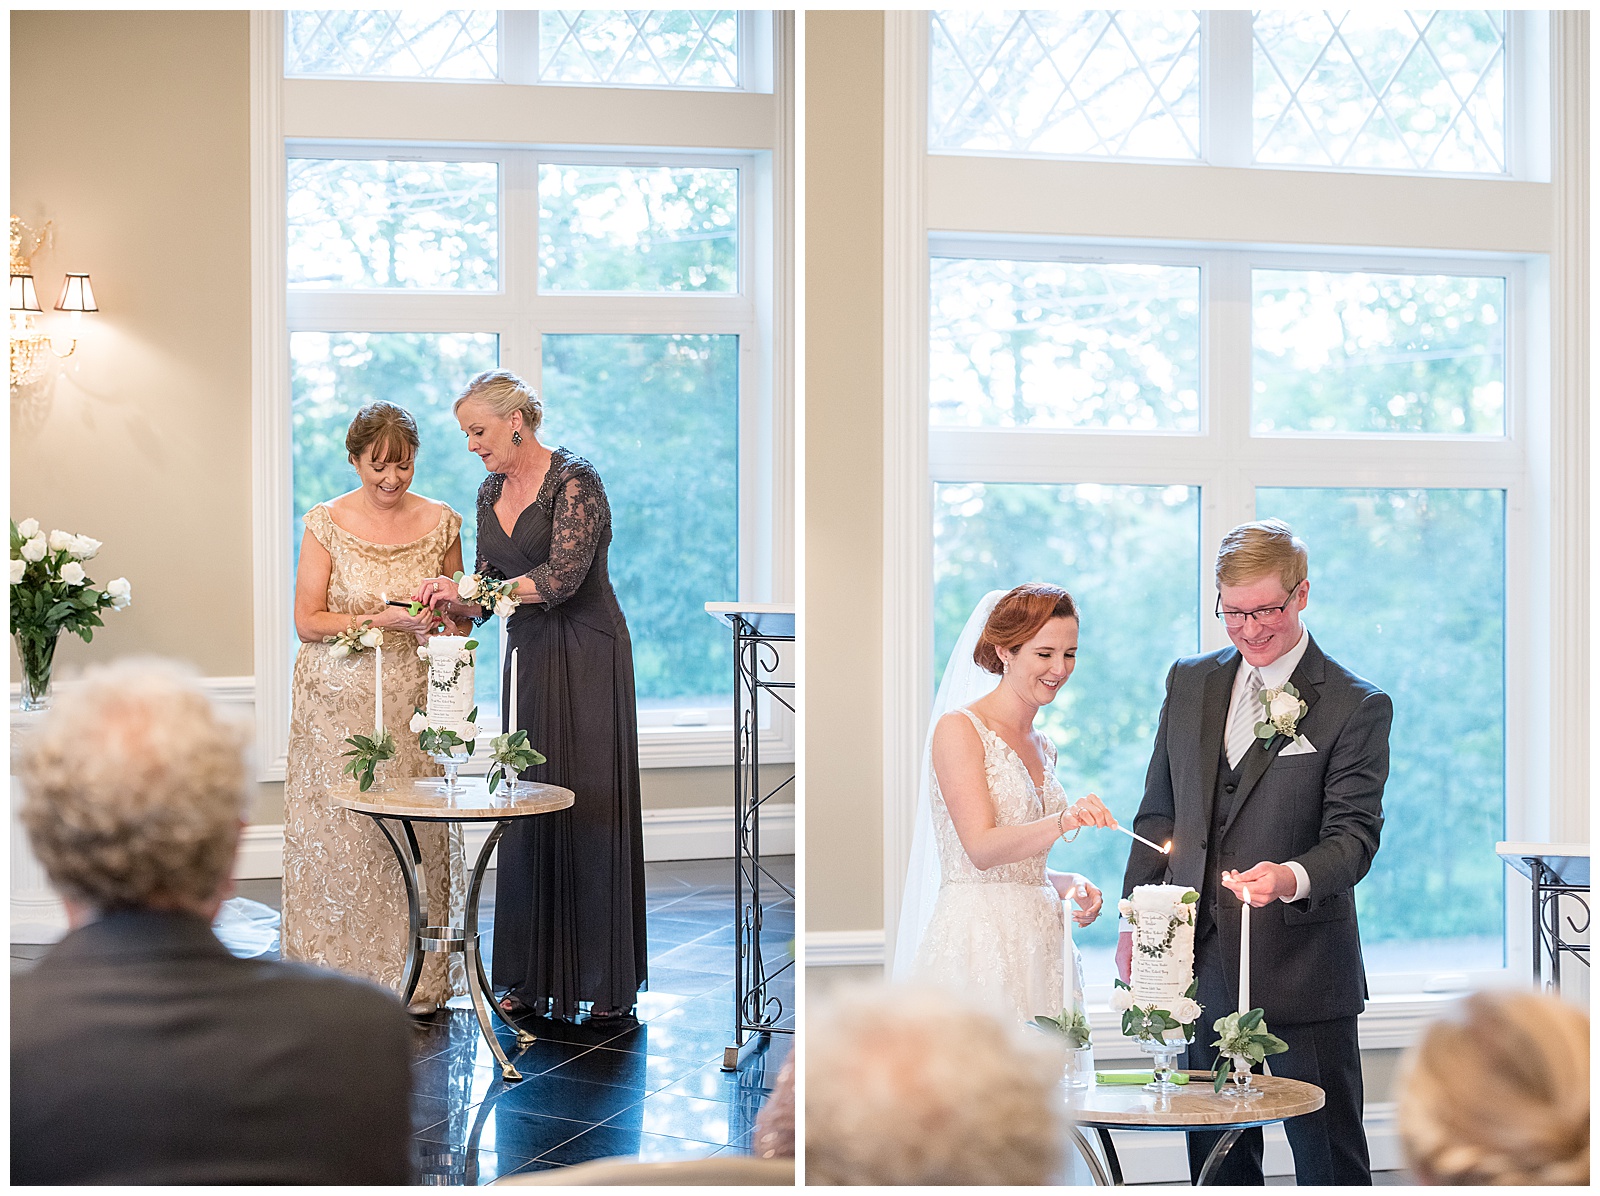 bride and groom together lighting the unity candle during wedding ceremony with sunshine shining through the windows